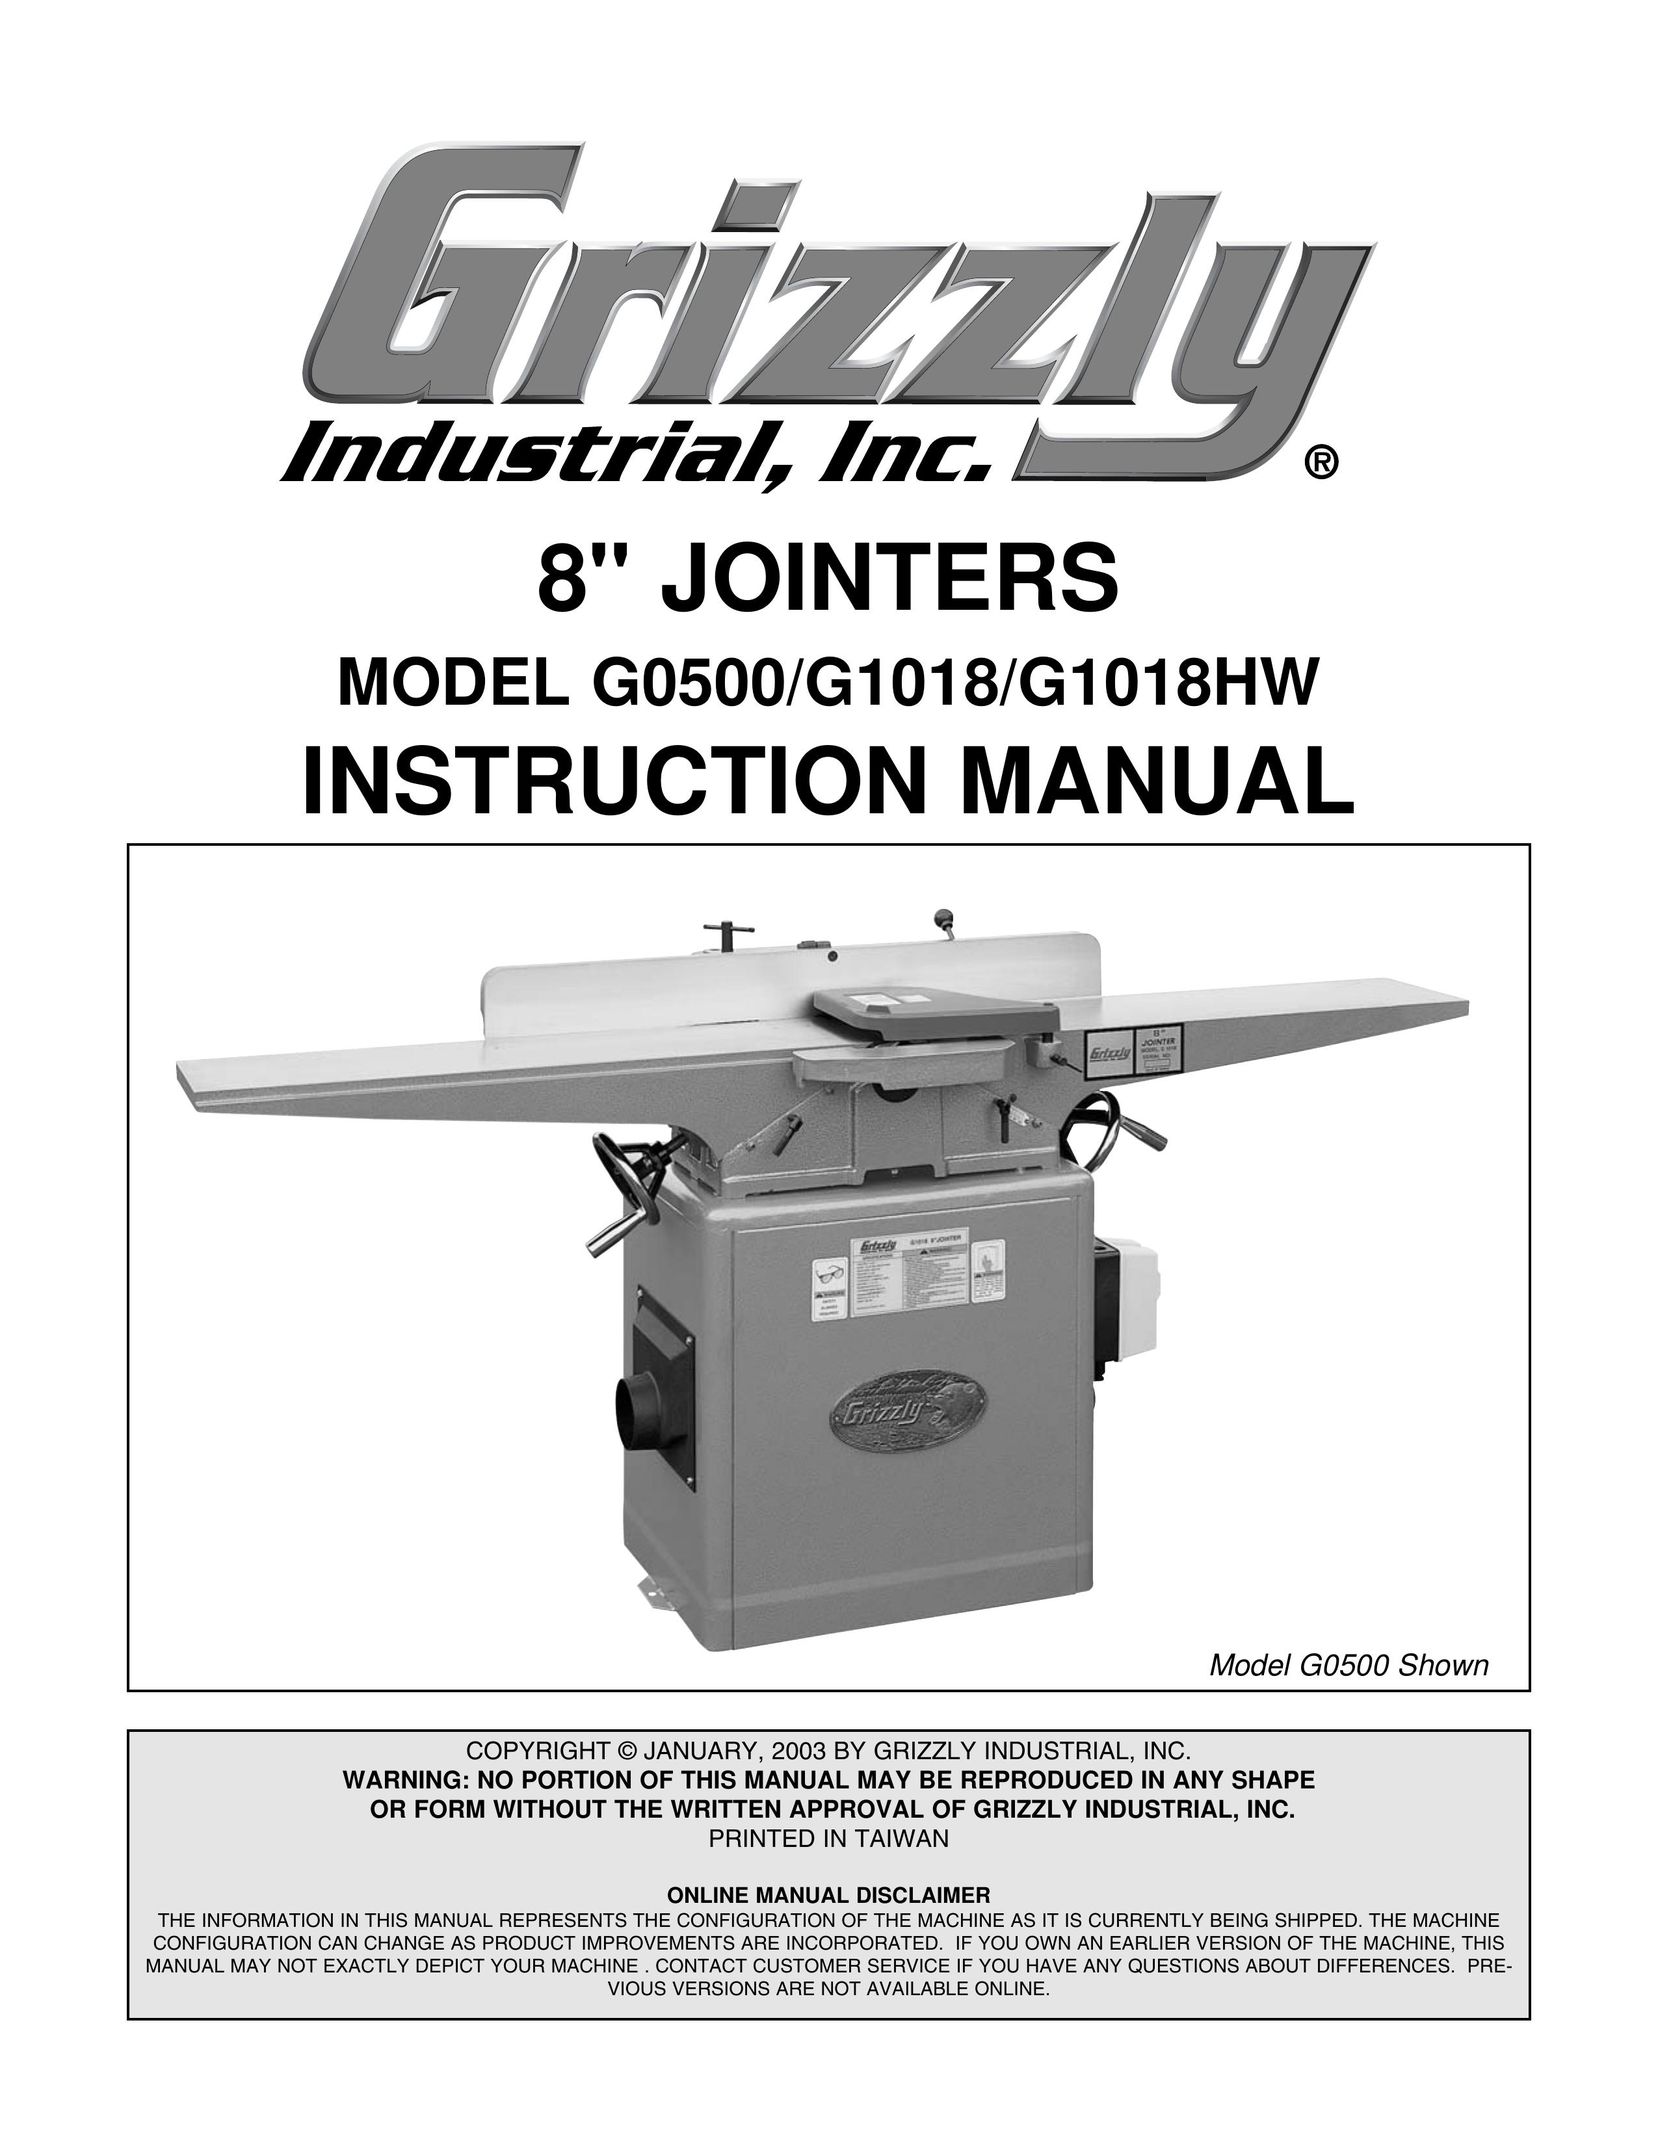 Grizzly G1018 Biscuit Joiner User Manual